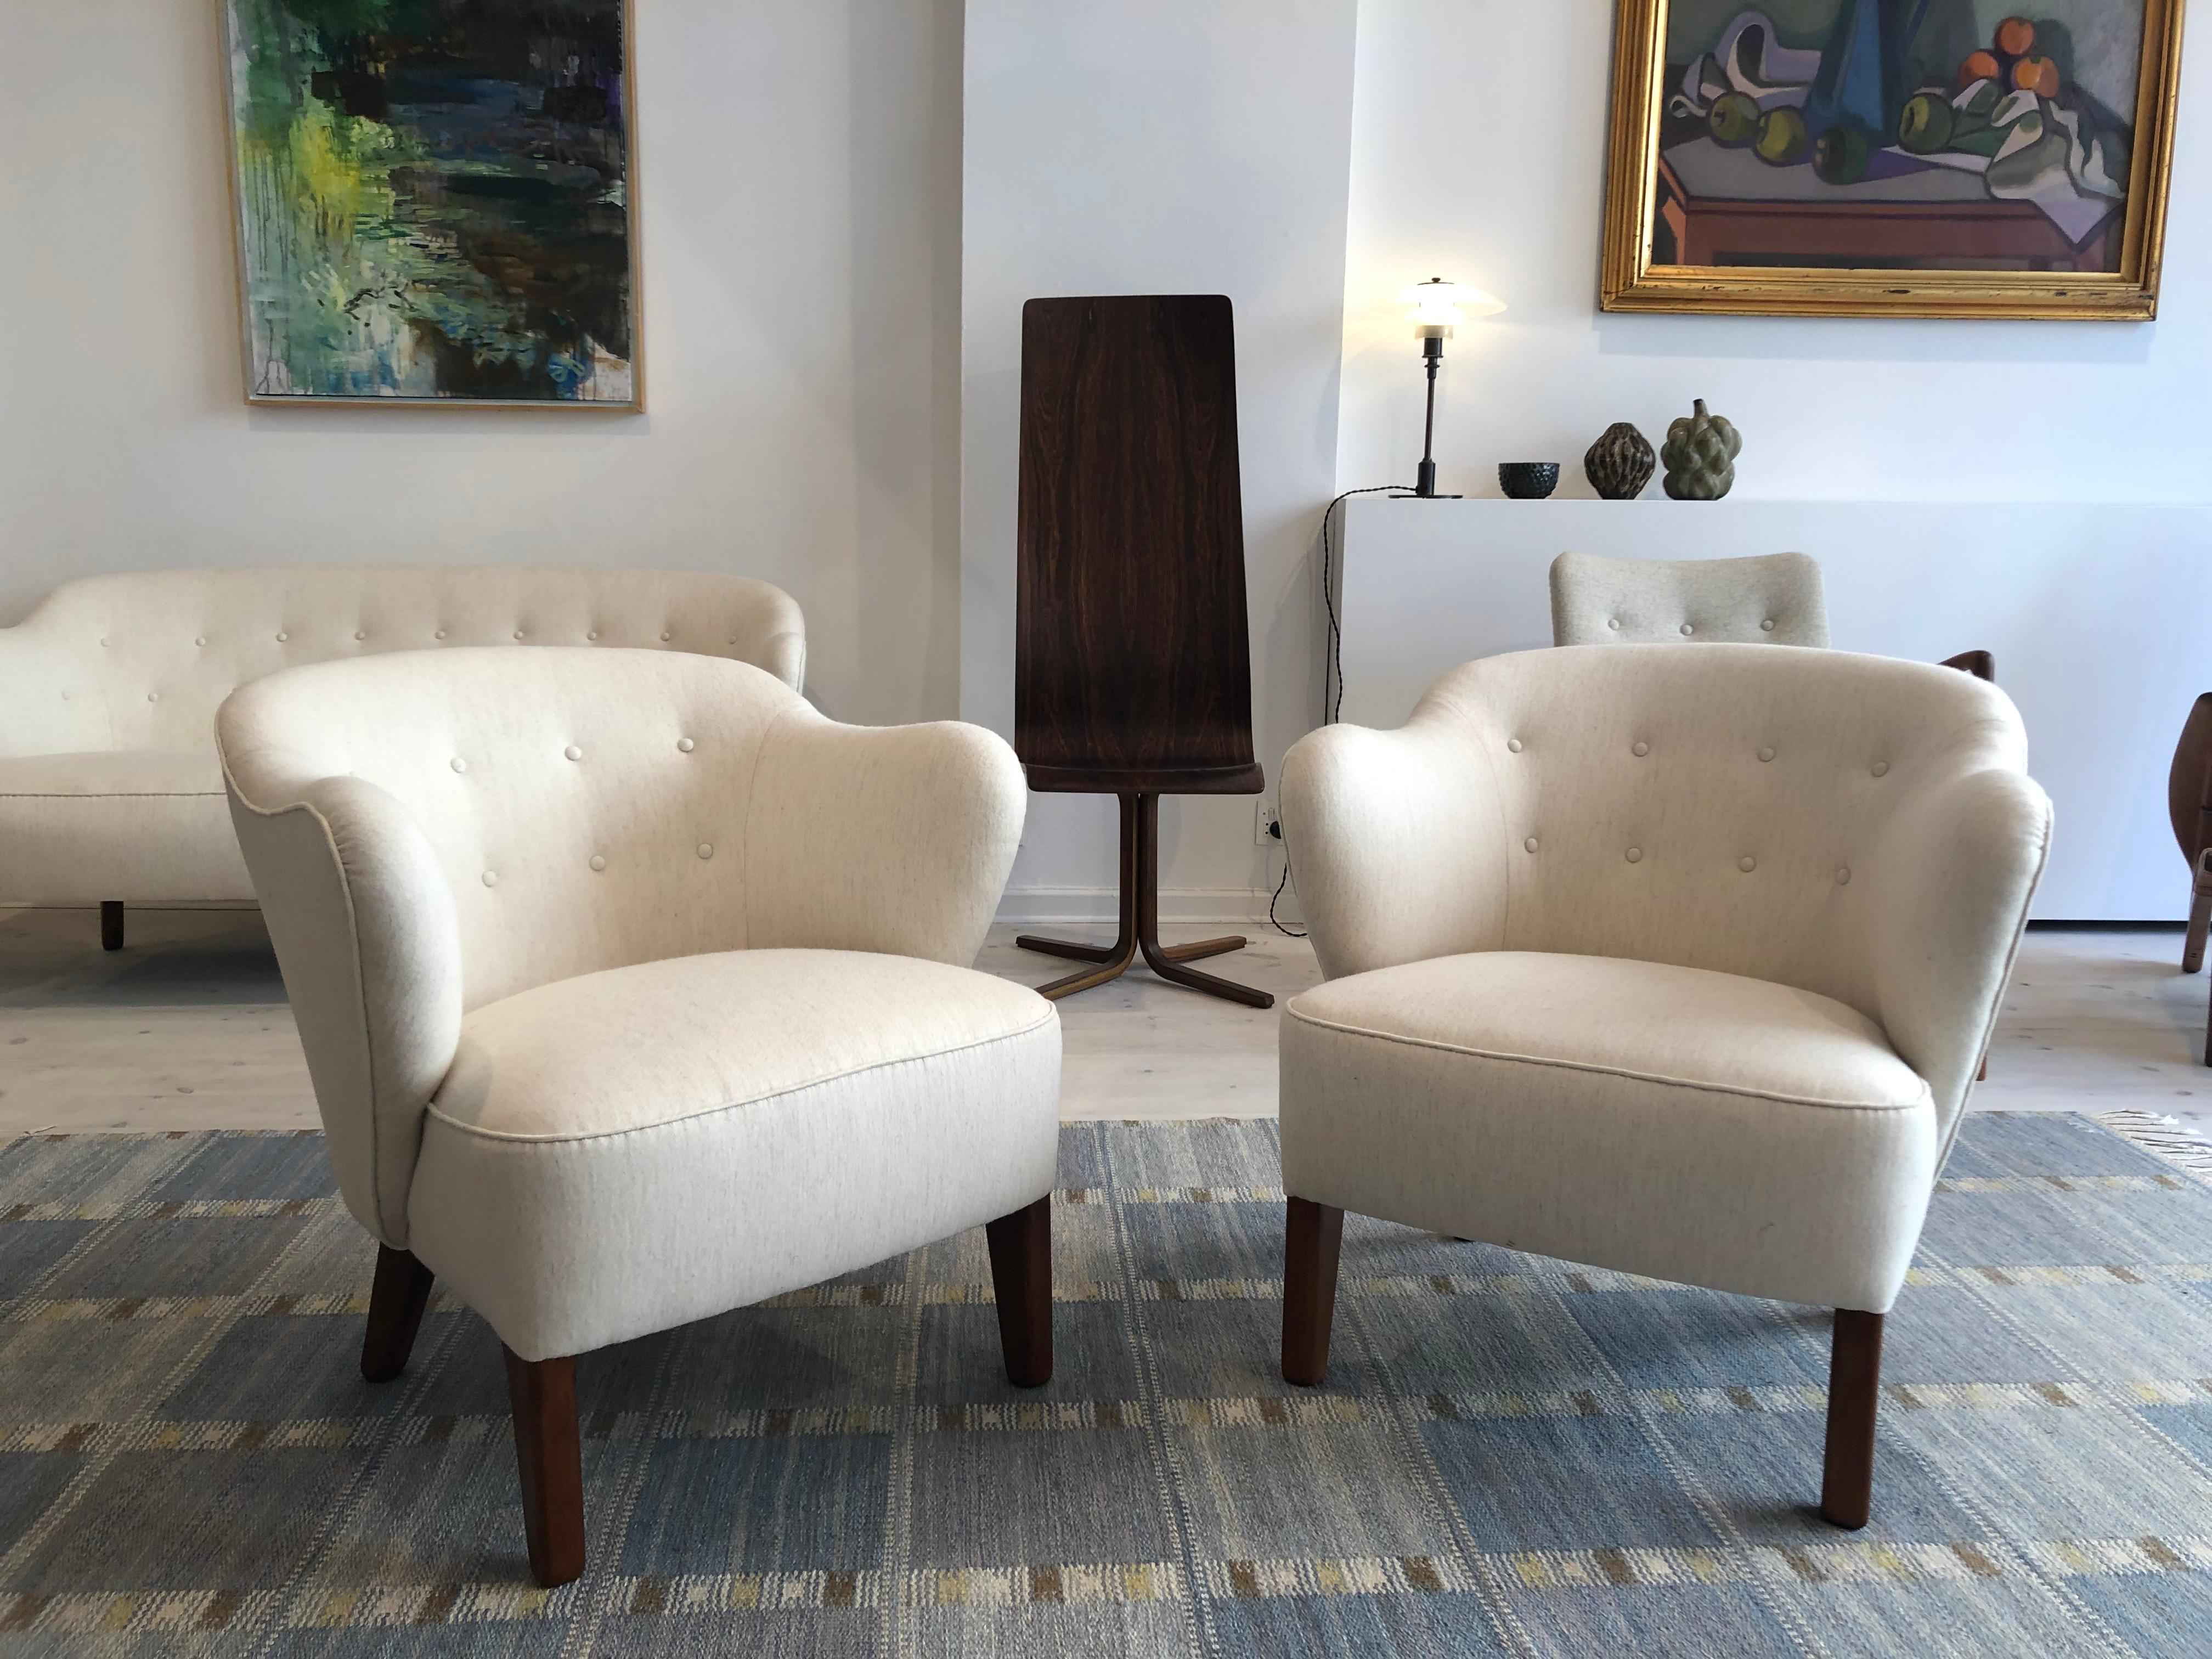 Flemming Lassen, pair of easy chairs for master cabinetmaker Jacob Kjaer, Denmark. Tapering legs in stained ash and reupholstered in white Savak fabric by Tove Kindt-Larsen.

The model was presented at The Copenhagen Cabinetmakers' Guild